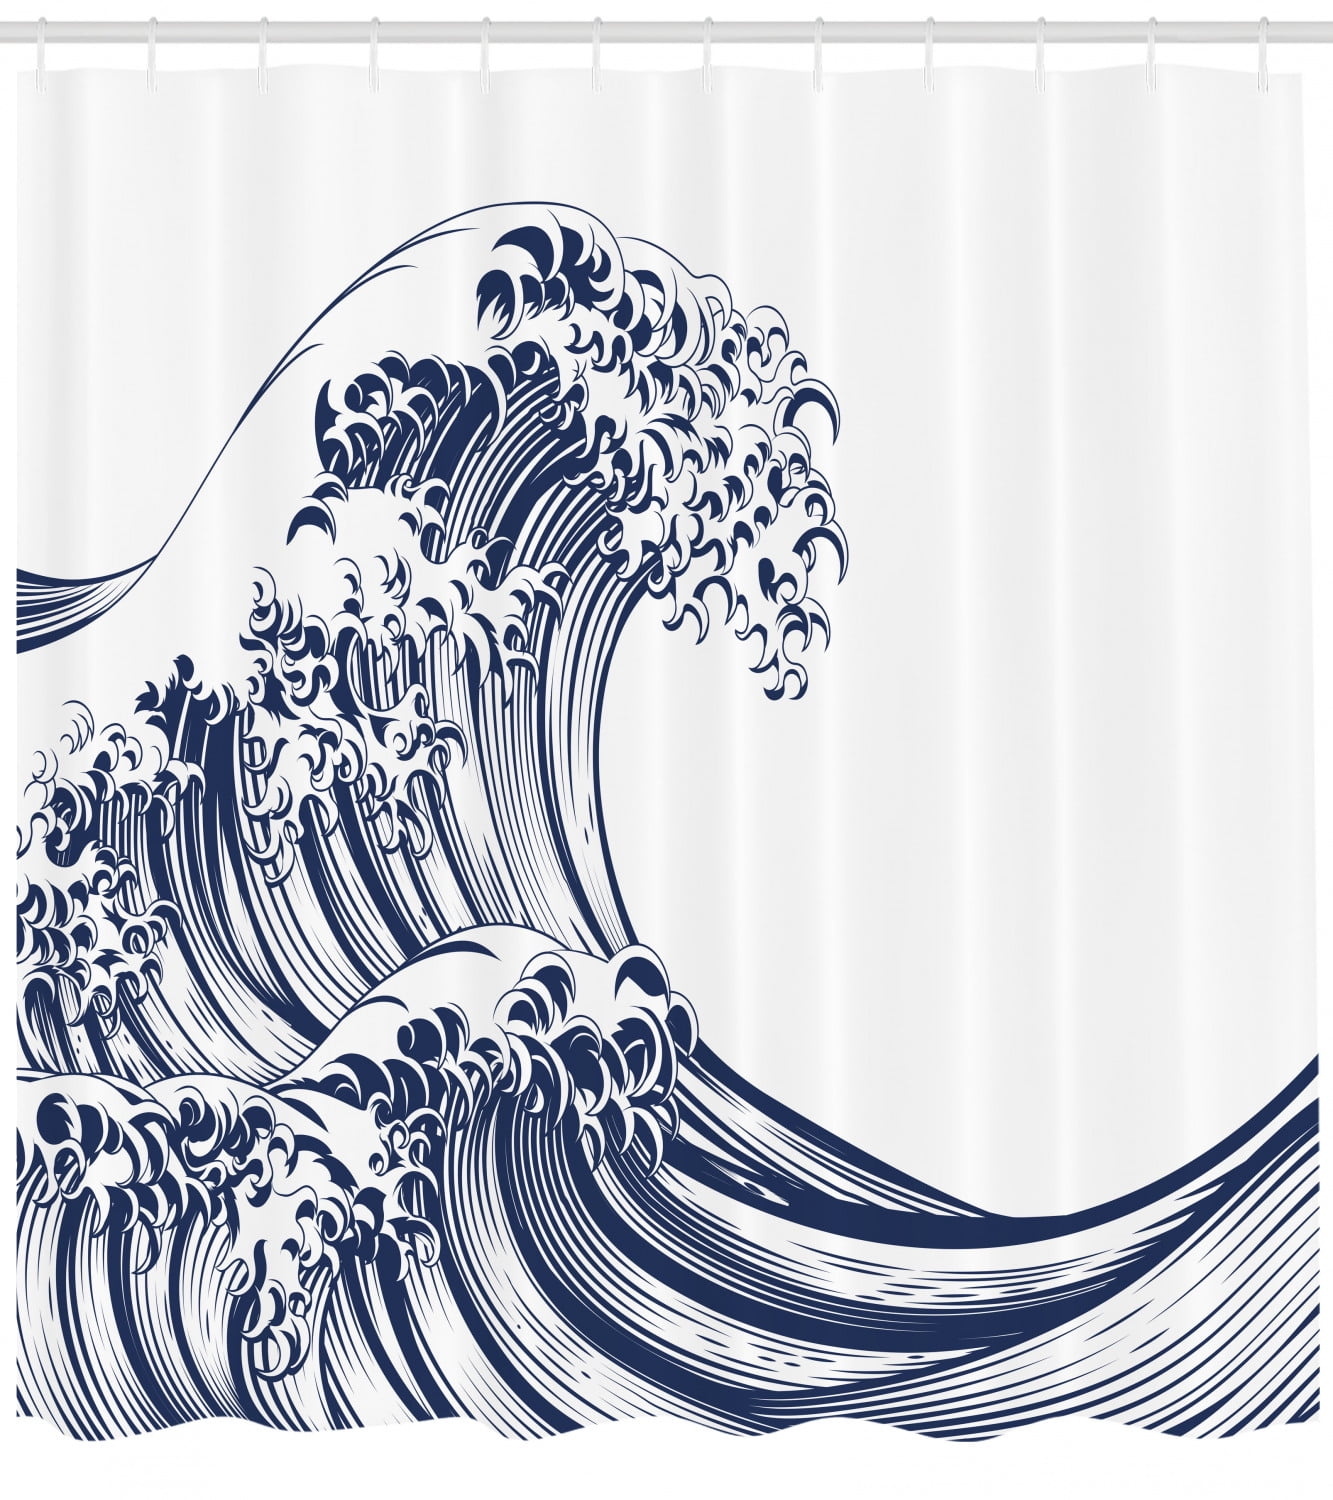 Japanese Painting Great Wave Off Kanagawa Waterproof Shower Curtain With Hooks